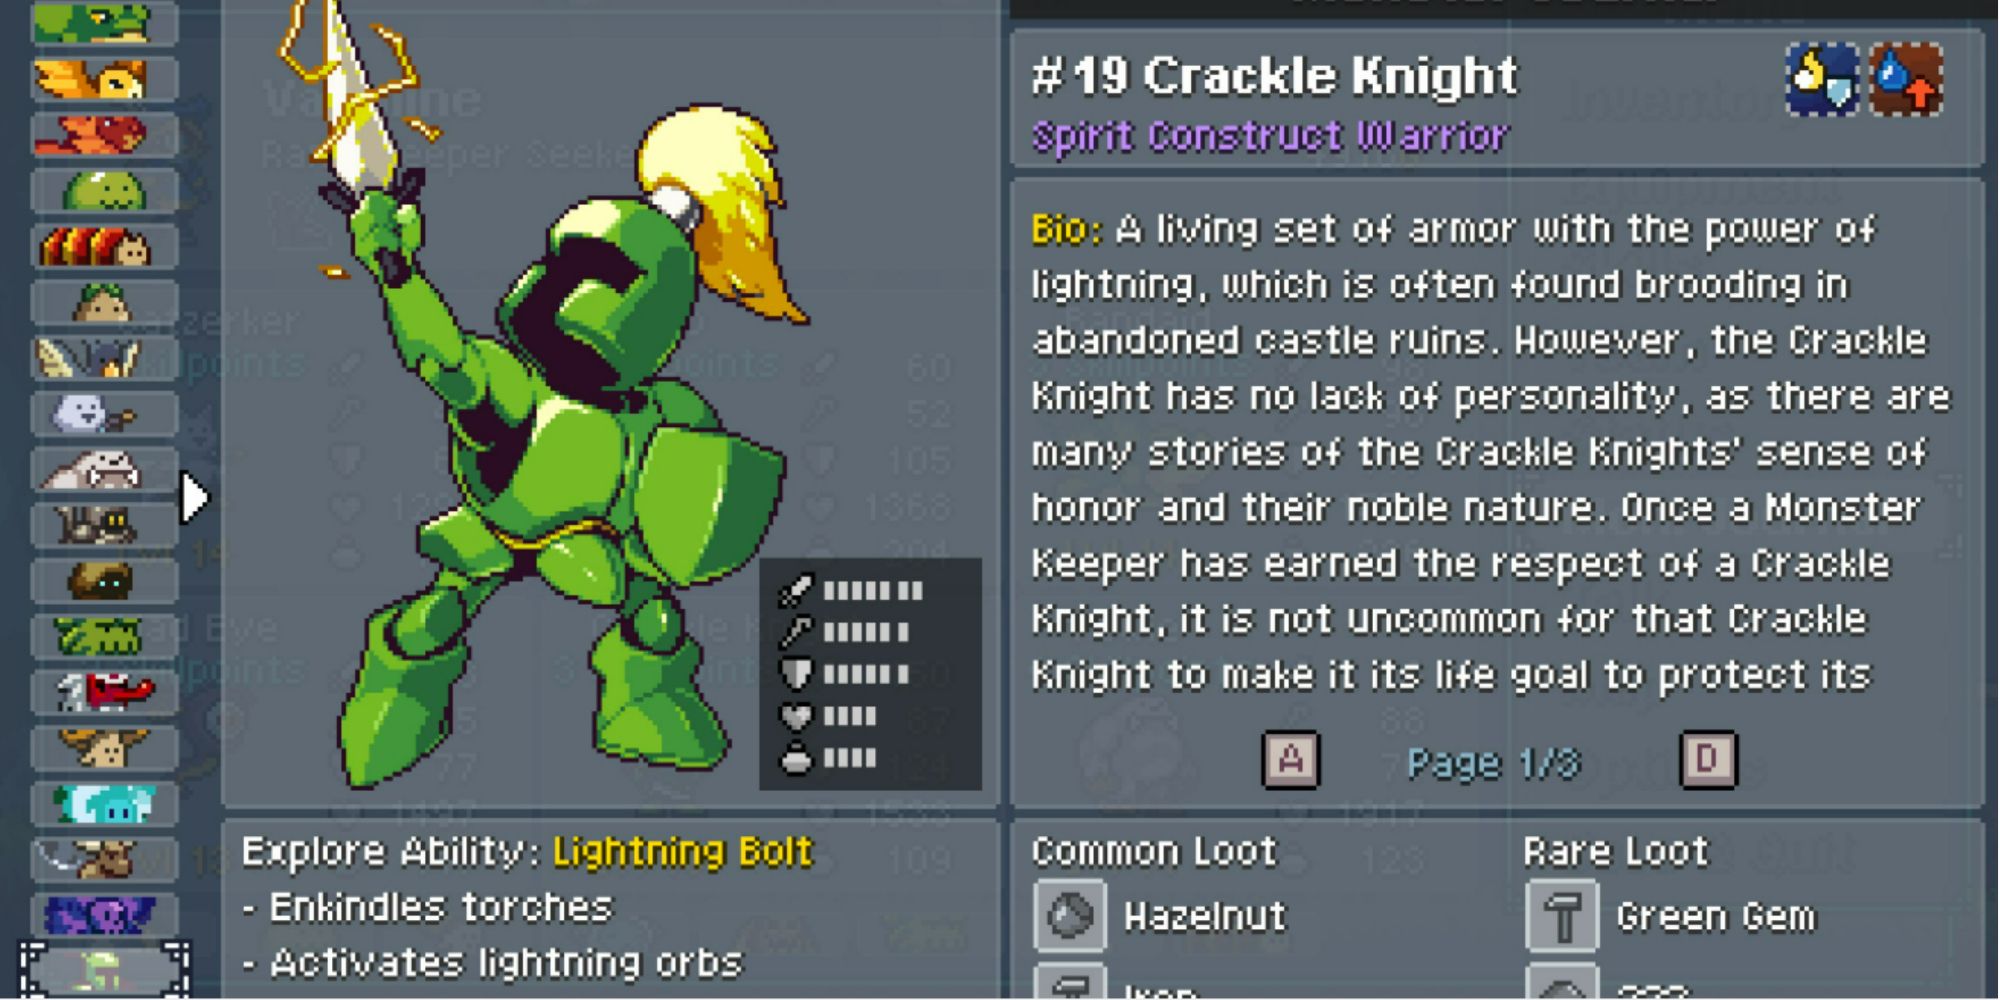 crackle knight journal entry in monster sanctuary